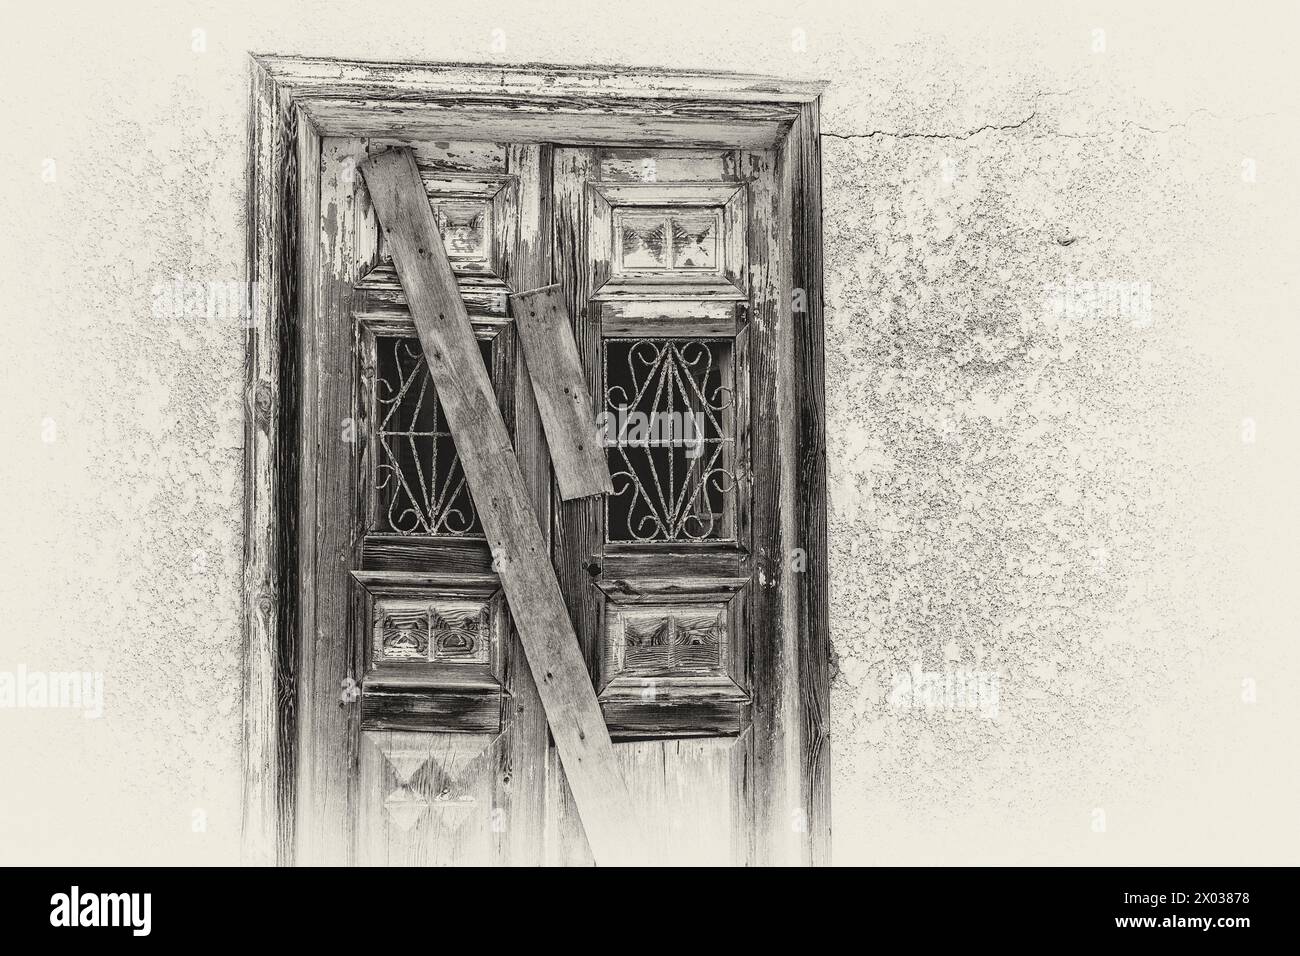 A monochrome filtered image of planks covering a boarded up door on a derelict arabian house in the middle east. Stock Photo